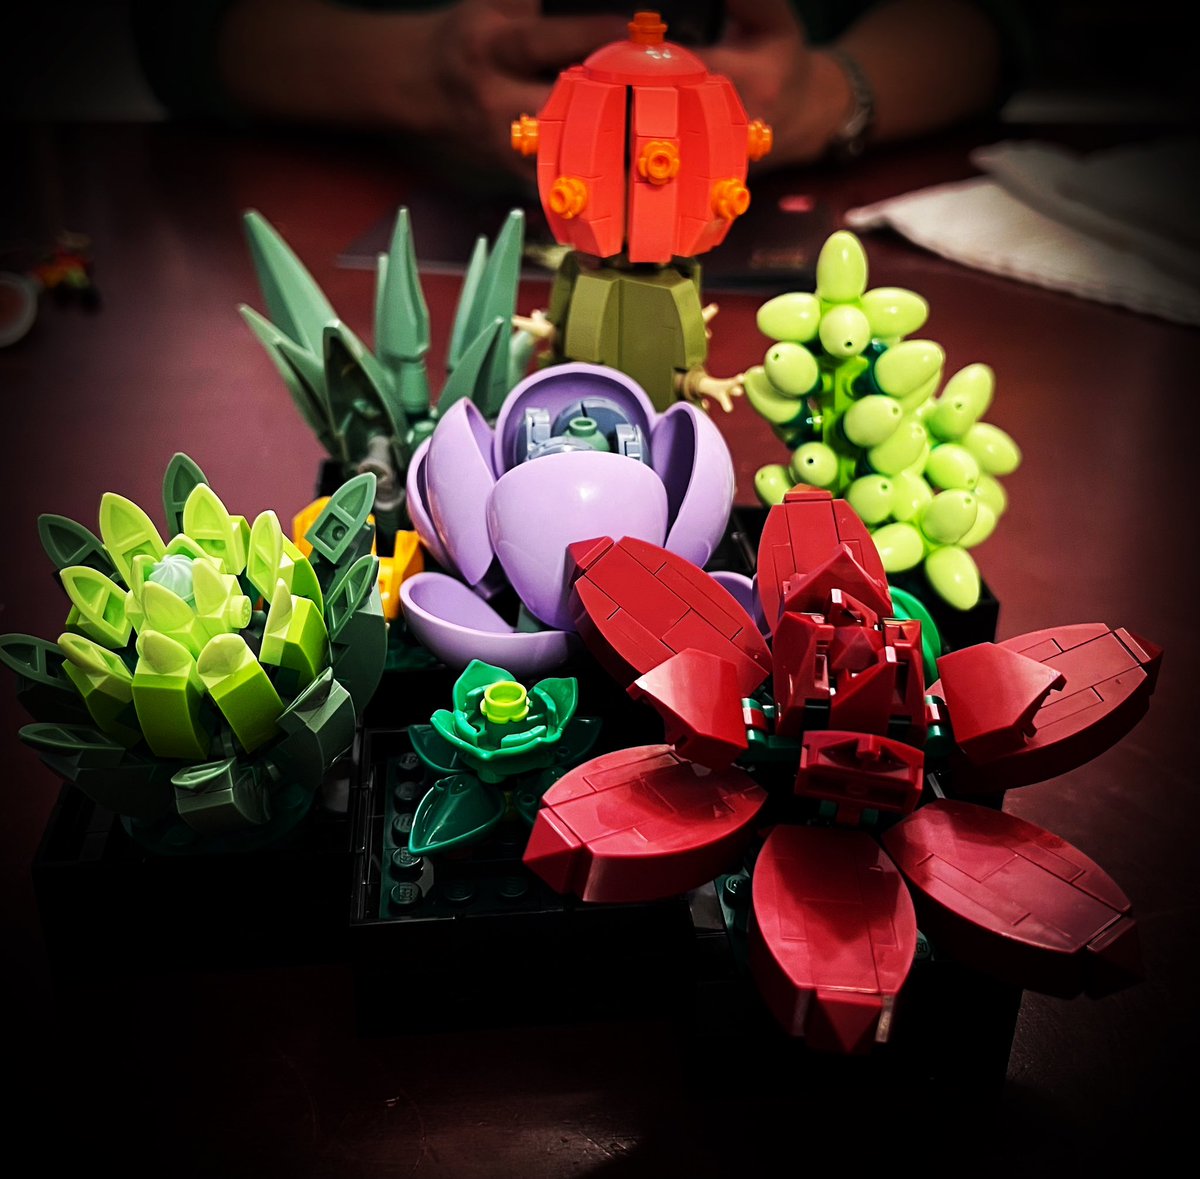 Lego project. Succulents. #AnxietyTools